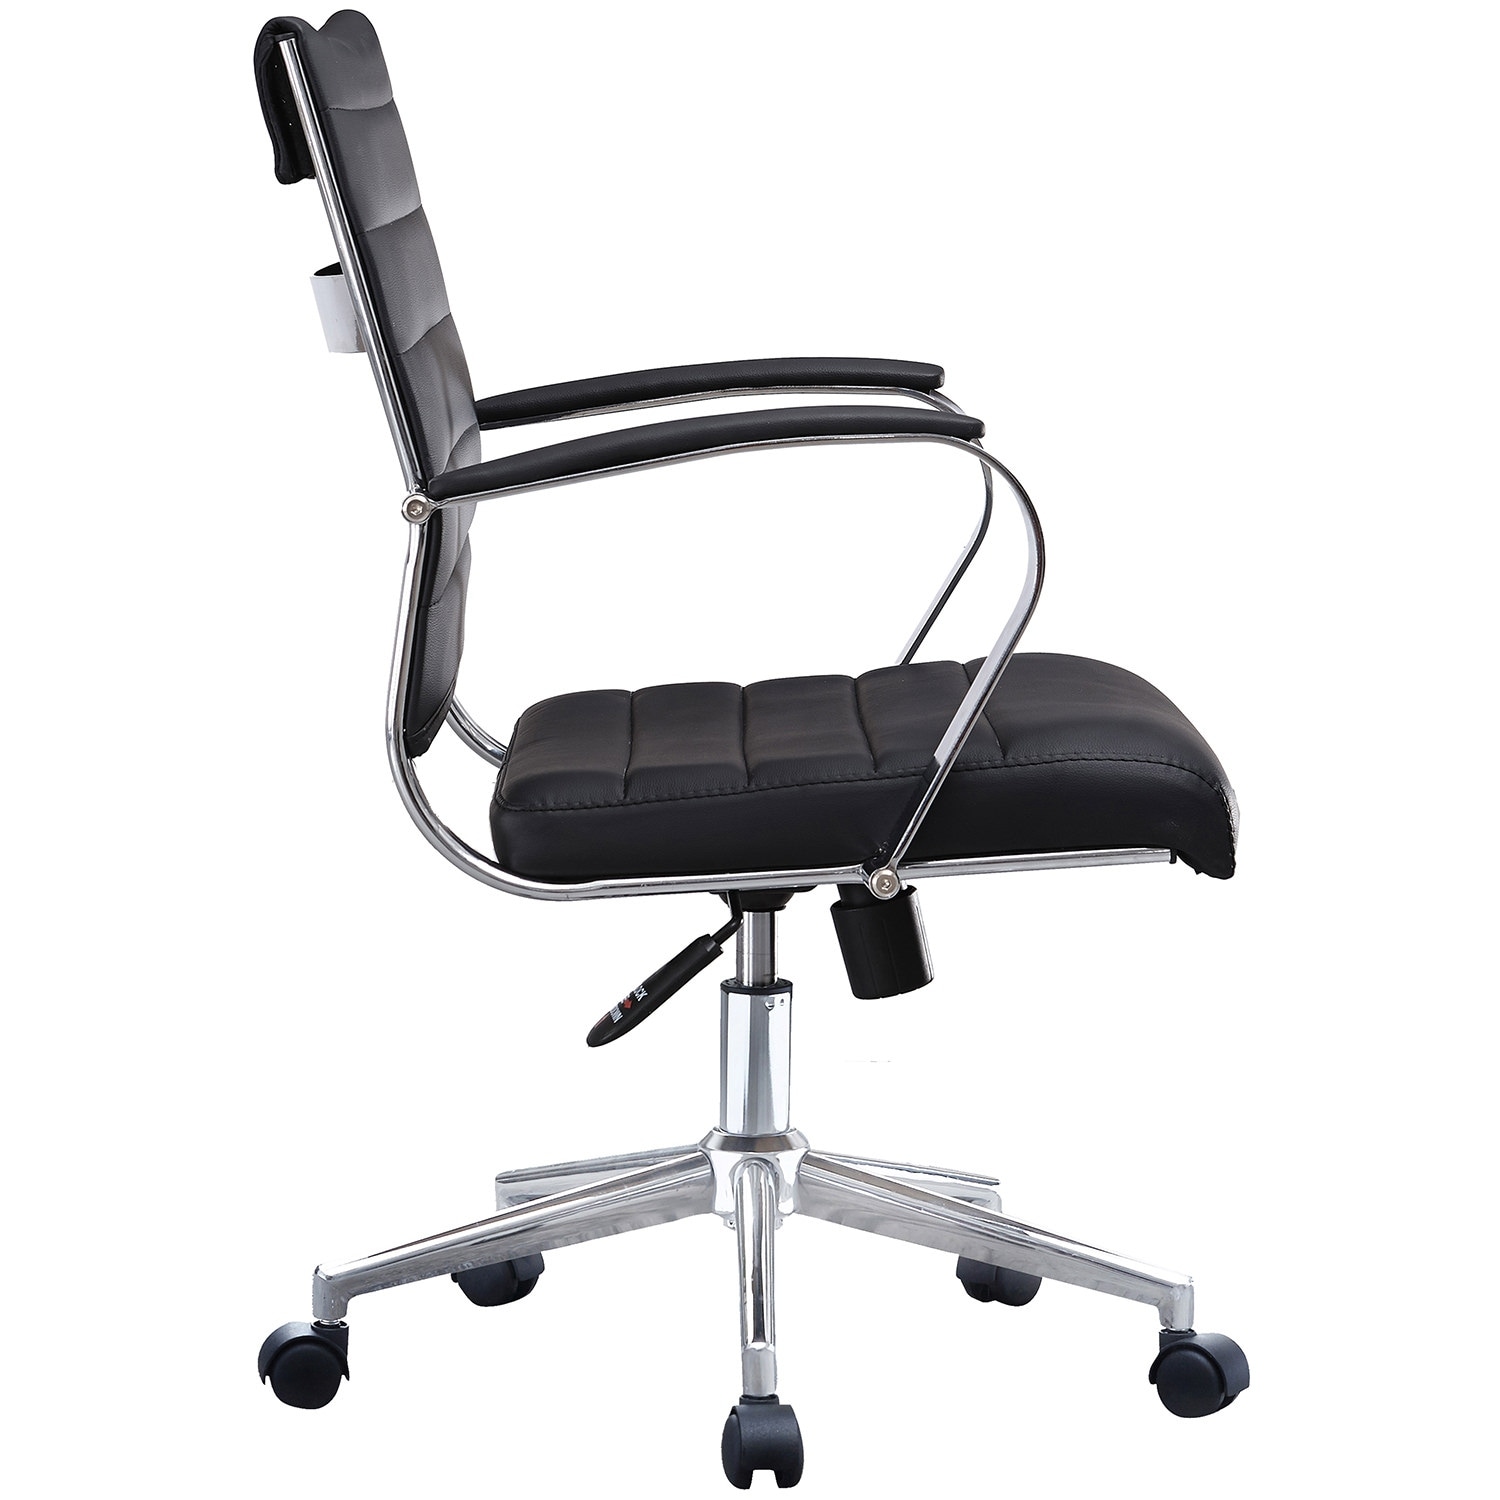 https://ak1.ostkcdn.com/images/products/is/images/direct/38611966d4994ea6bf1c77113ceb1de789ceb22d/Modern-Office-Chair%2C-Executive-Mid-Back-Conference-Room-Chair-in-PU-Leather-with-Wheels-and-Arms.jpg